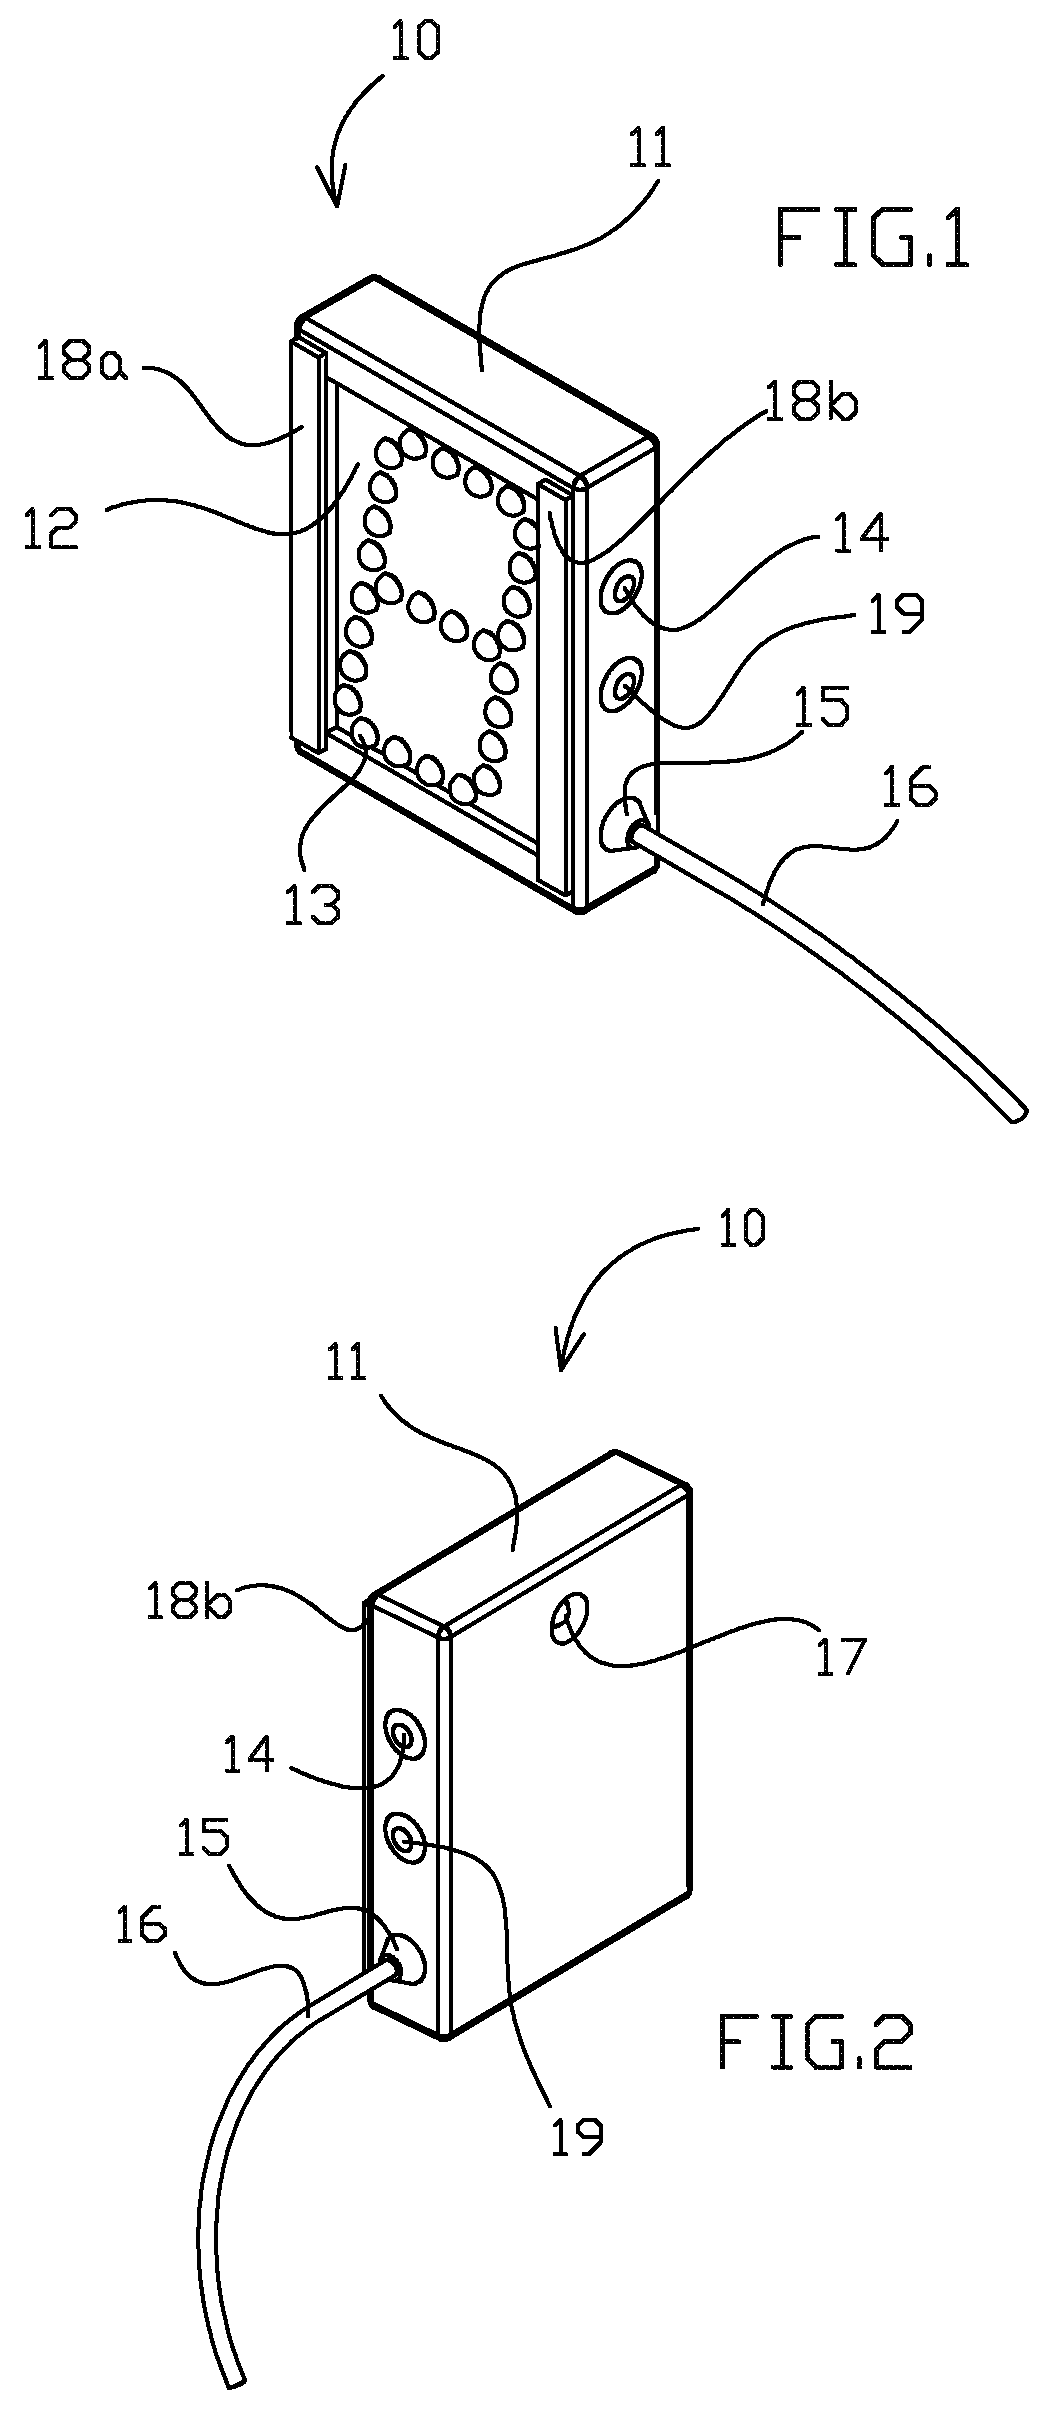 Numerical display module for trail vehicles